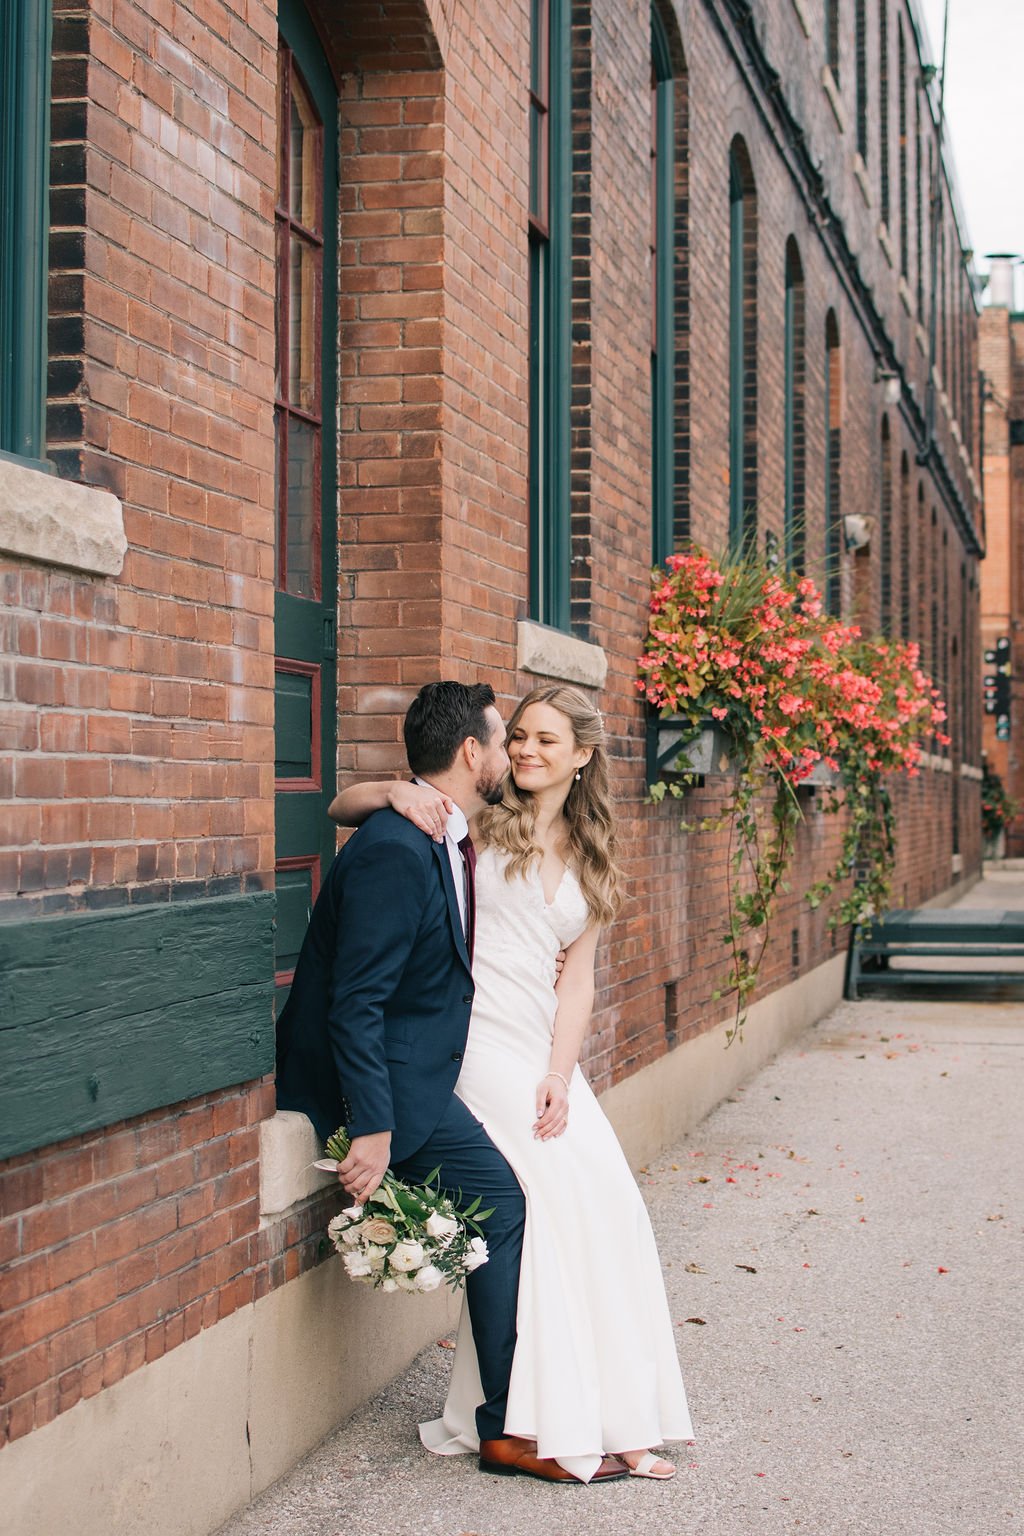 Timeless wedding day photographs in Toronto's Liberty Village by Toronto wedding photographers, Ugo Photography